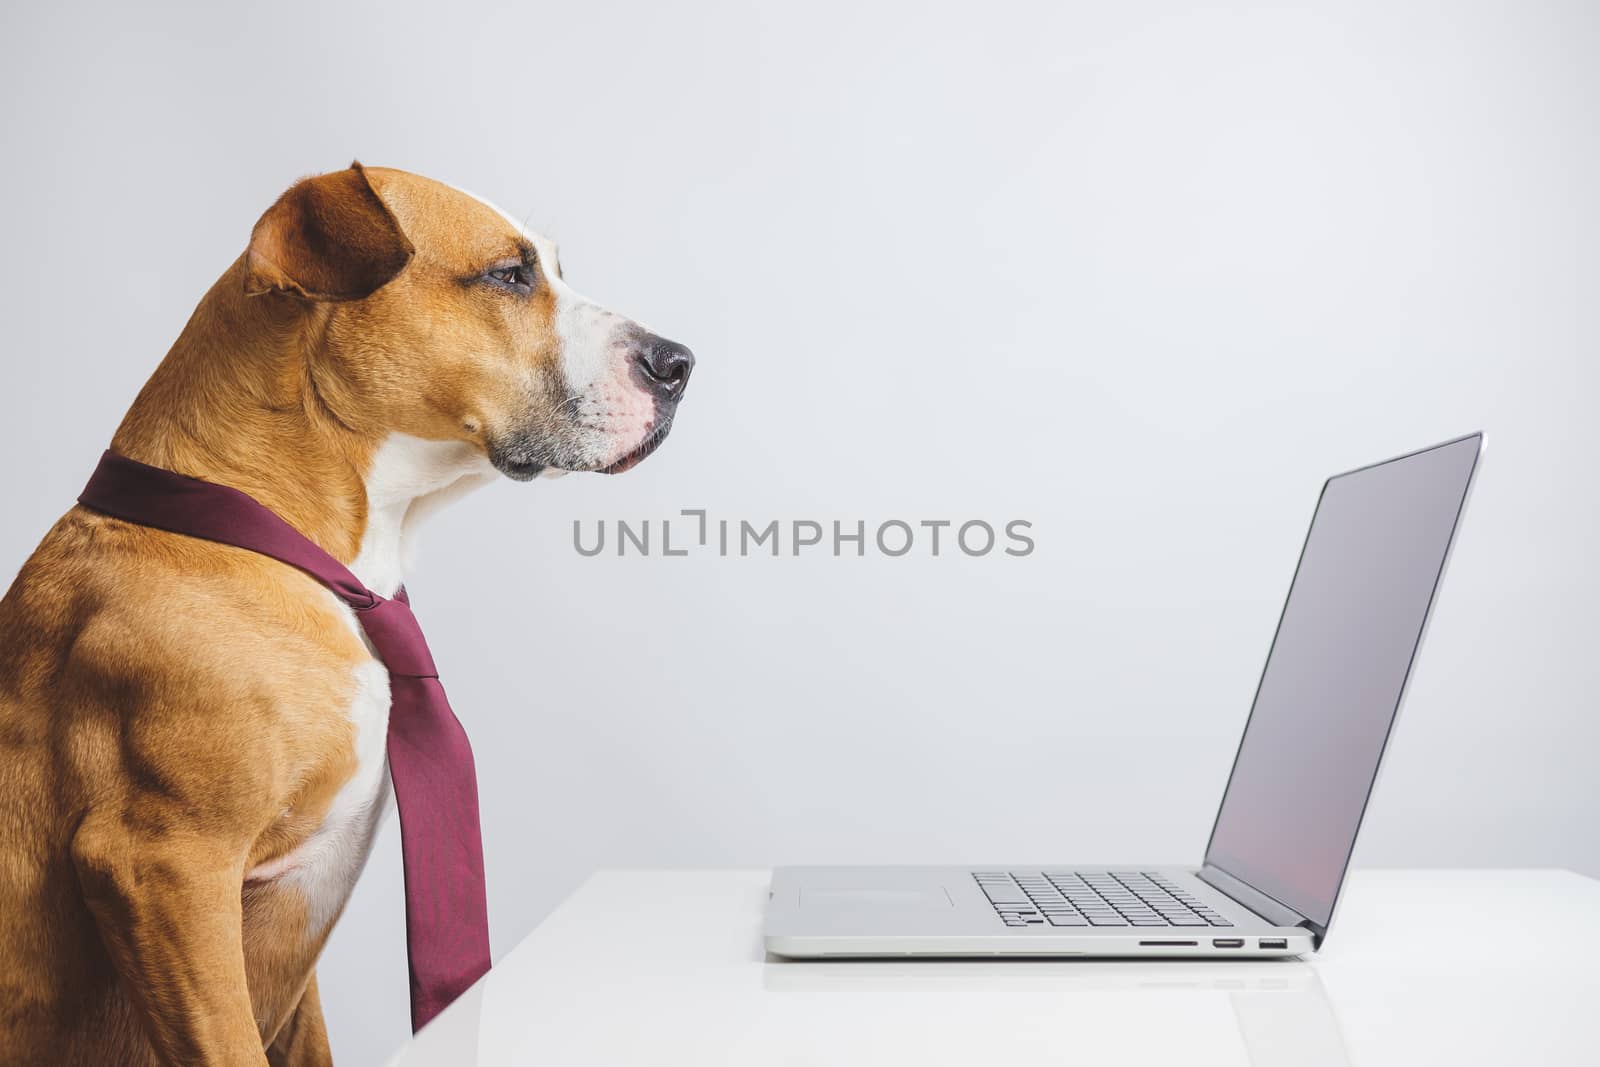 A bossy looking dog in a tie sits at a computer desk in the office. Concept of a strict manager or CEO, work and office related humor